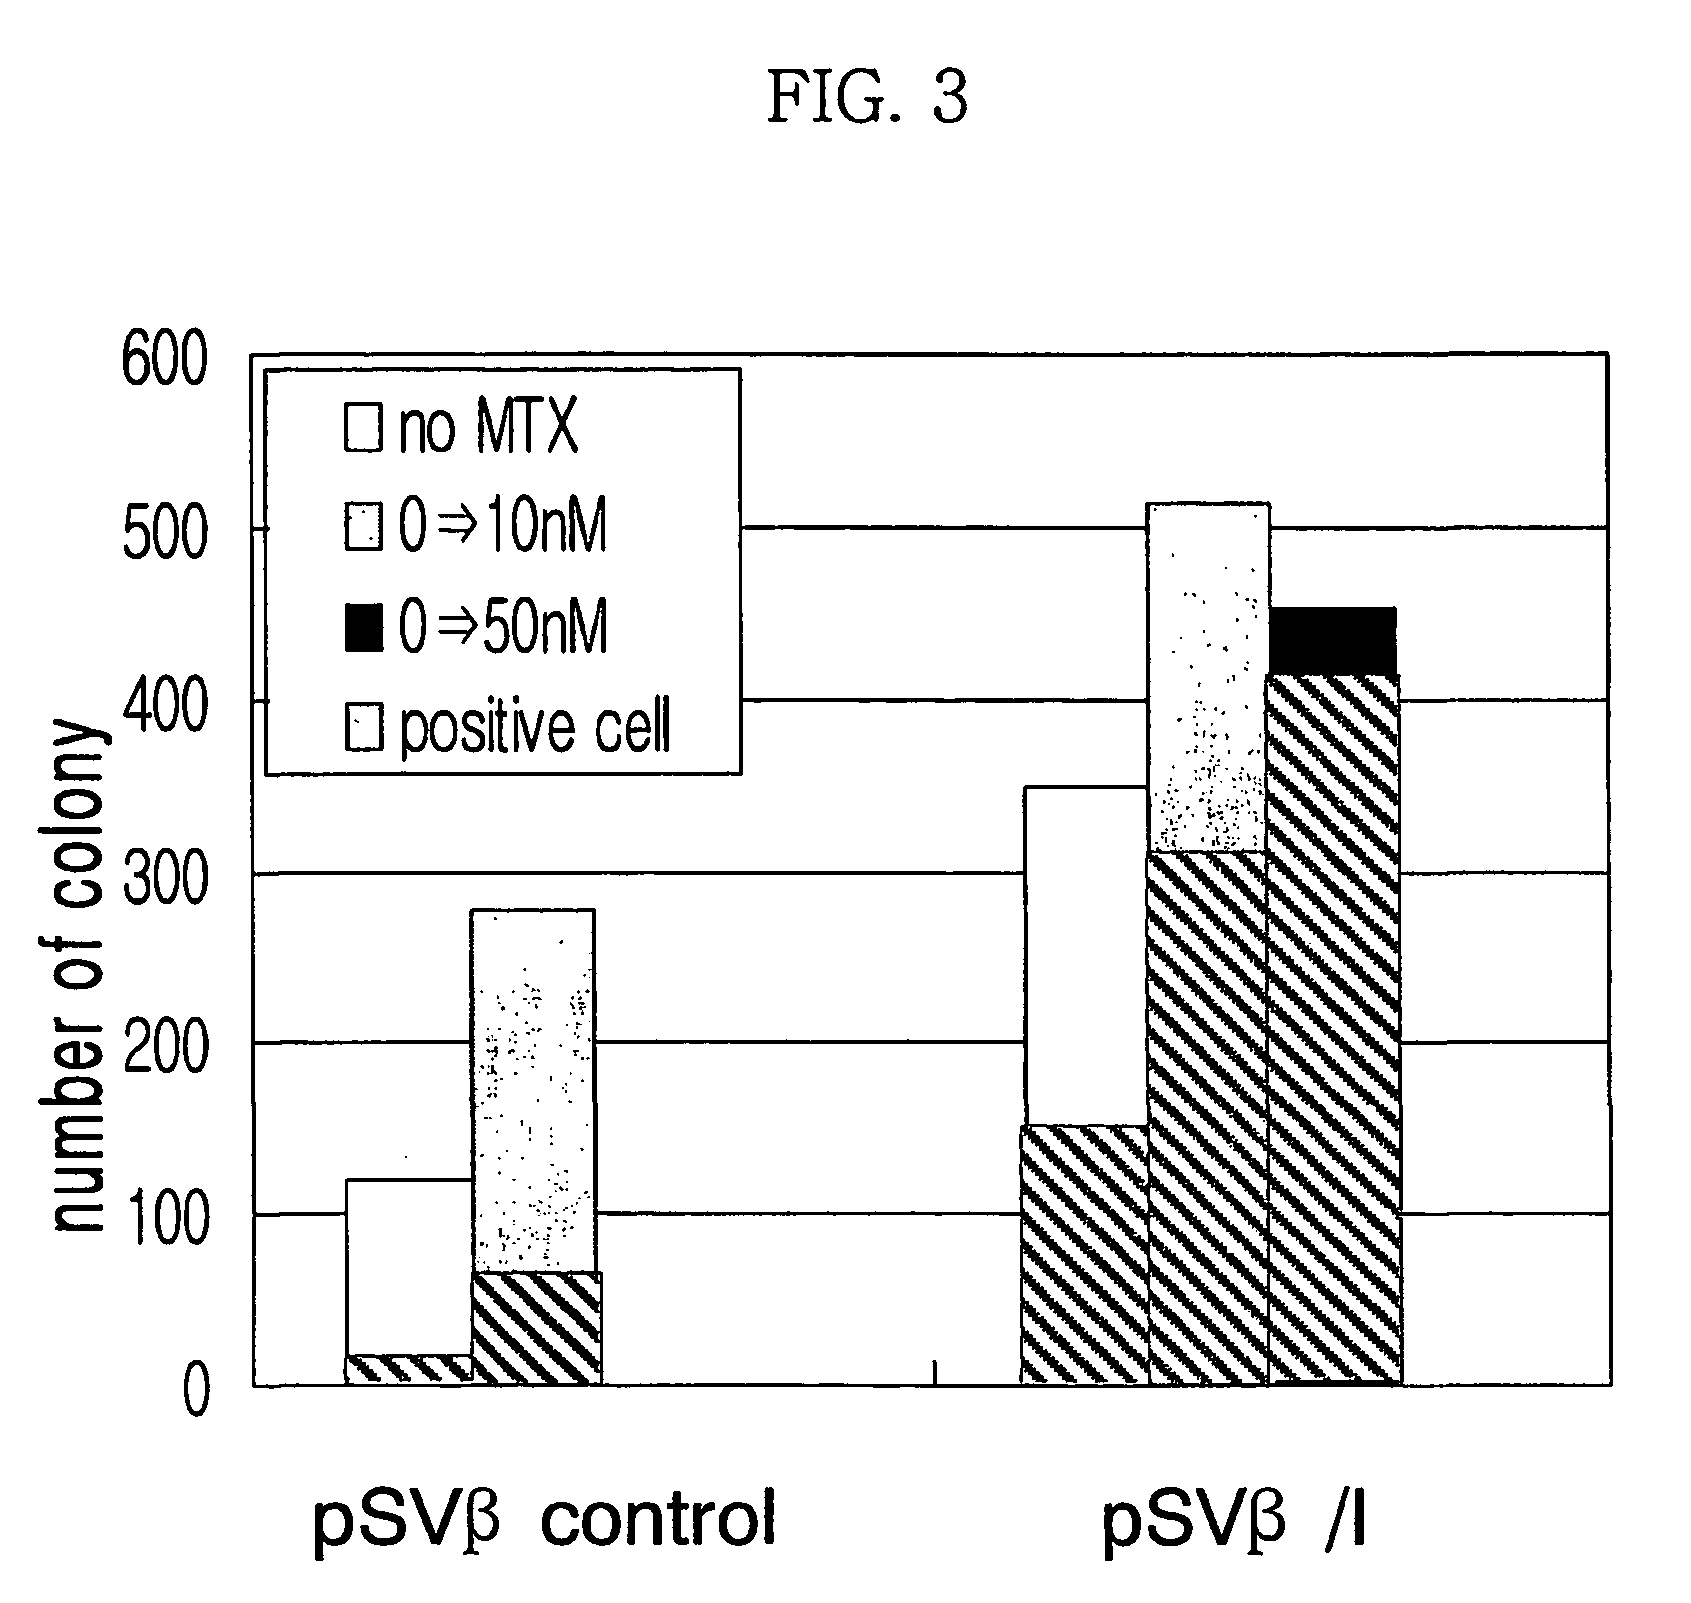 Expression vector for animal cell containing nuclear matrix attachment region of interferon beta